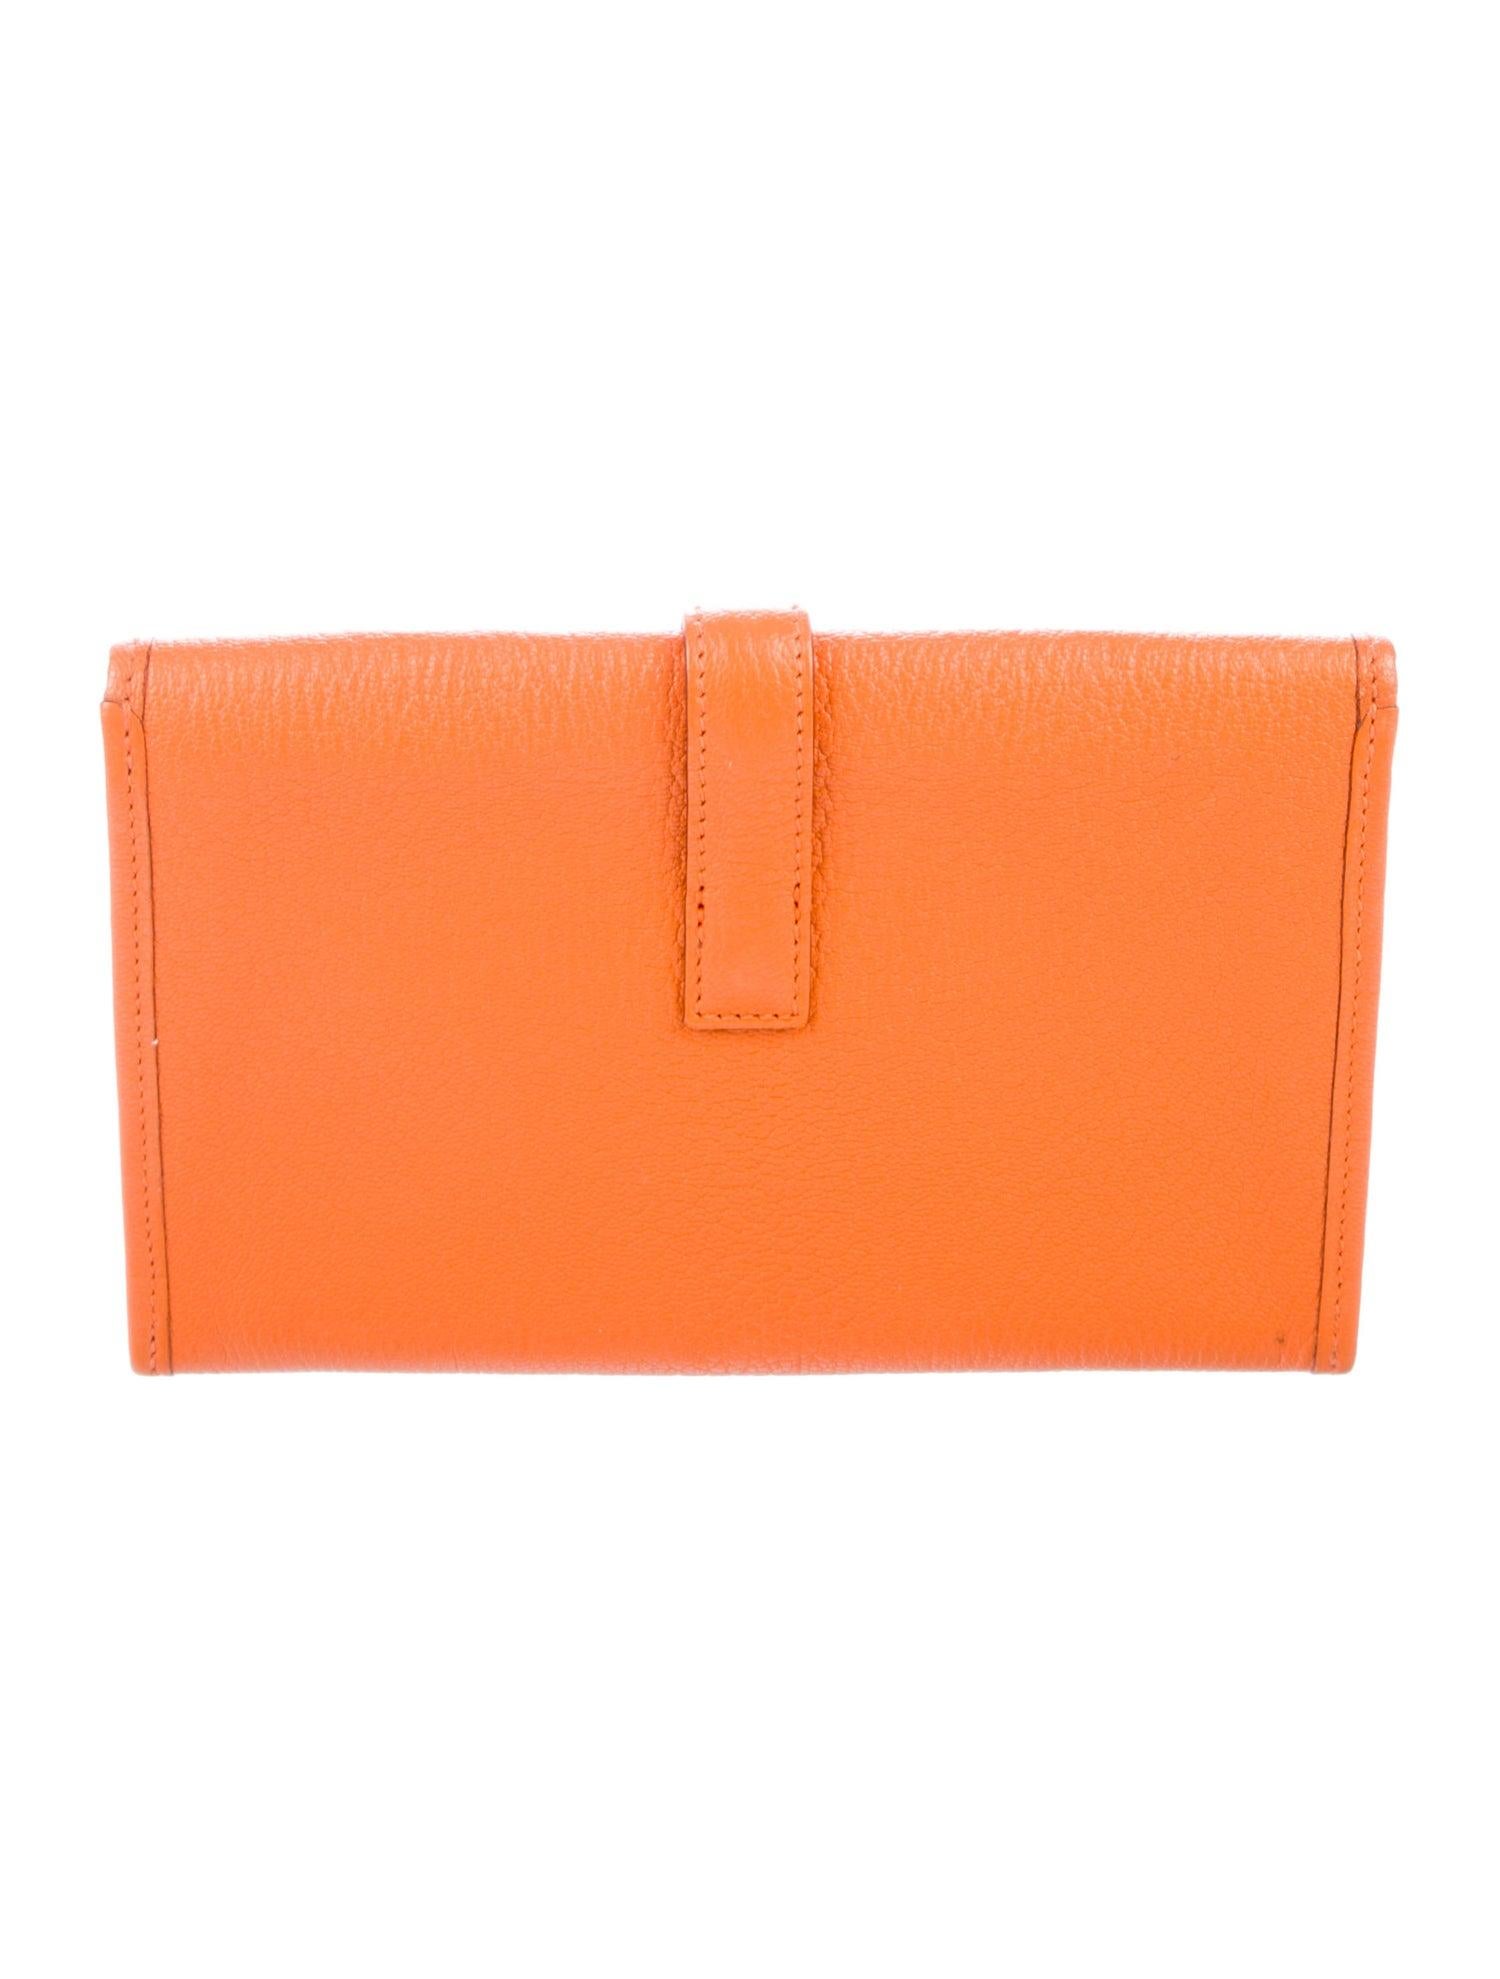 Hermes Light Orange Leather 'H' Jige Small Mini Logo Evening Clutch Flap Bag 

Leather
Leather lining
Slip in buckle closure
Made in France 
Measures 8